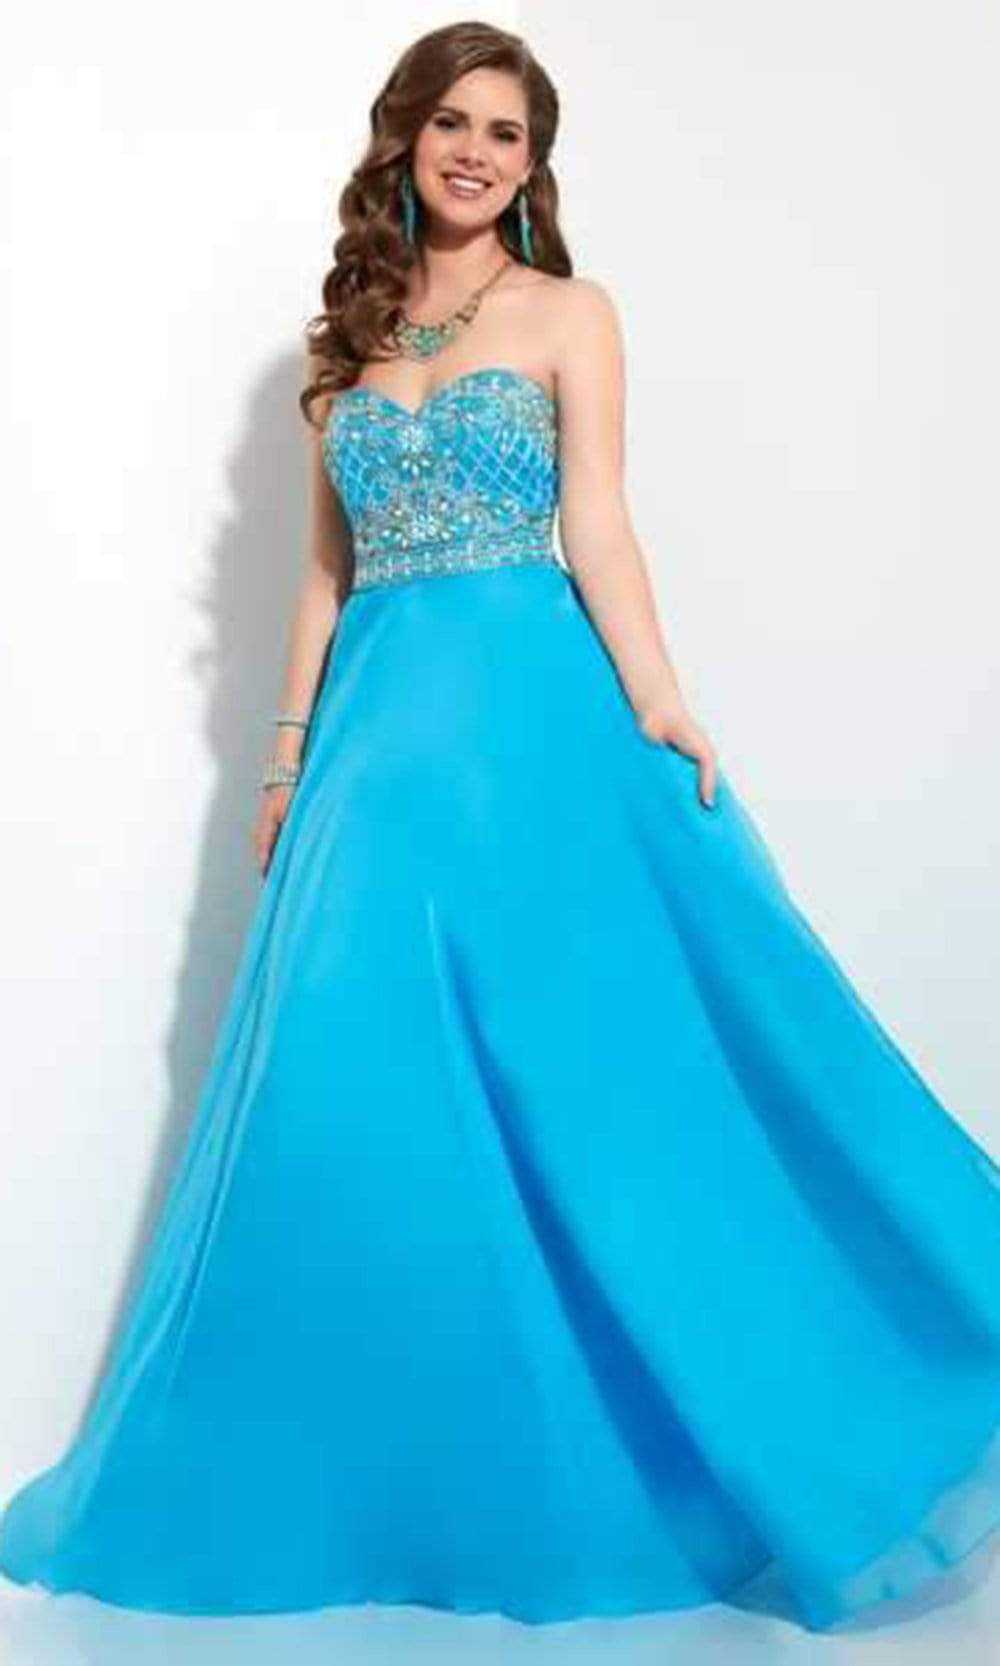 Studio 17, Studio 17 - Strapless Low Open Back Embellished Gown 12610 - 1 pc Turquoise In Size 12 Available